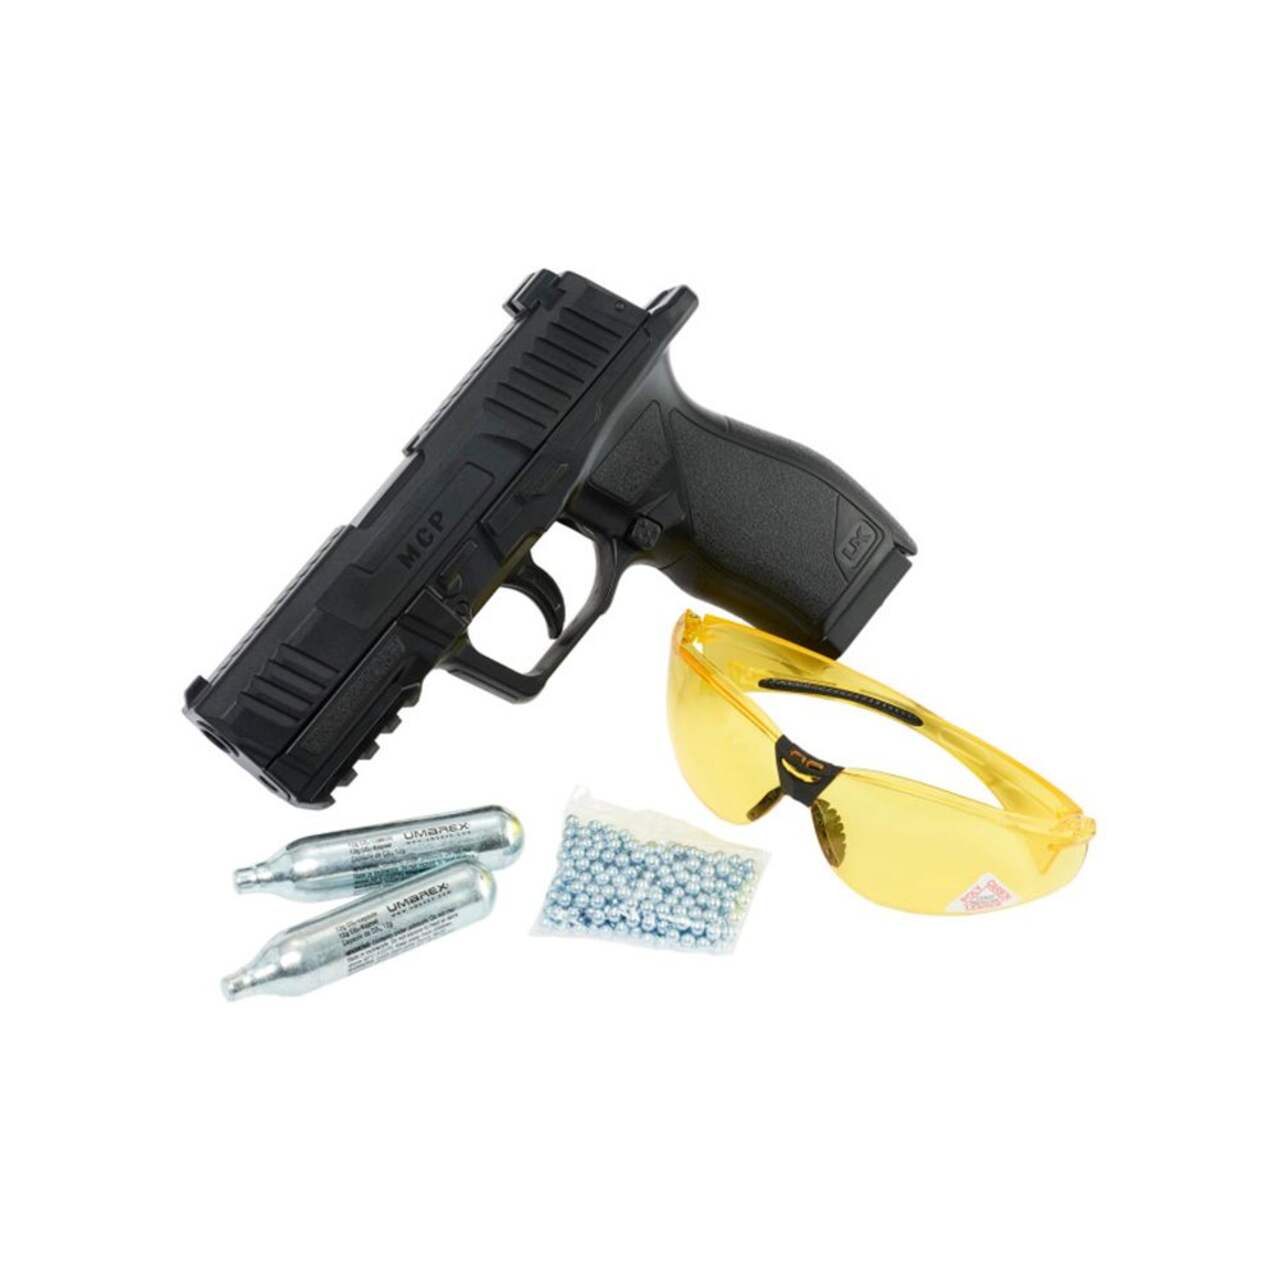 https://media-www.canadiantire.ca/product/playing/hunting/target-sports/3750138/umarex-mcp-kit-co2-powered-air-pistol-starter-kit-b90c844d-cb1b-40c3-bcbc-925c2451b321-jpgrendition.jpg?imdensity=1&imwidth=640&impolicy=mZoom